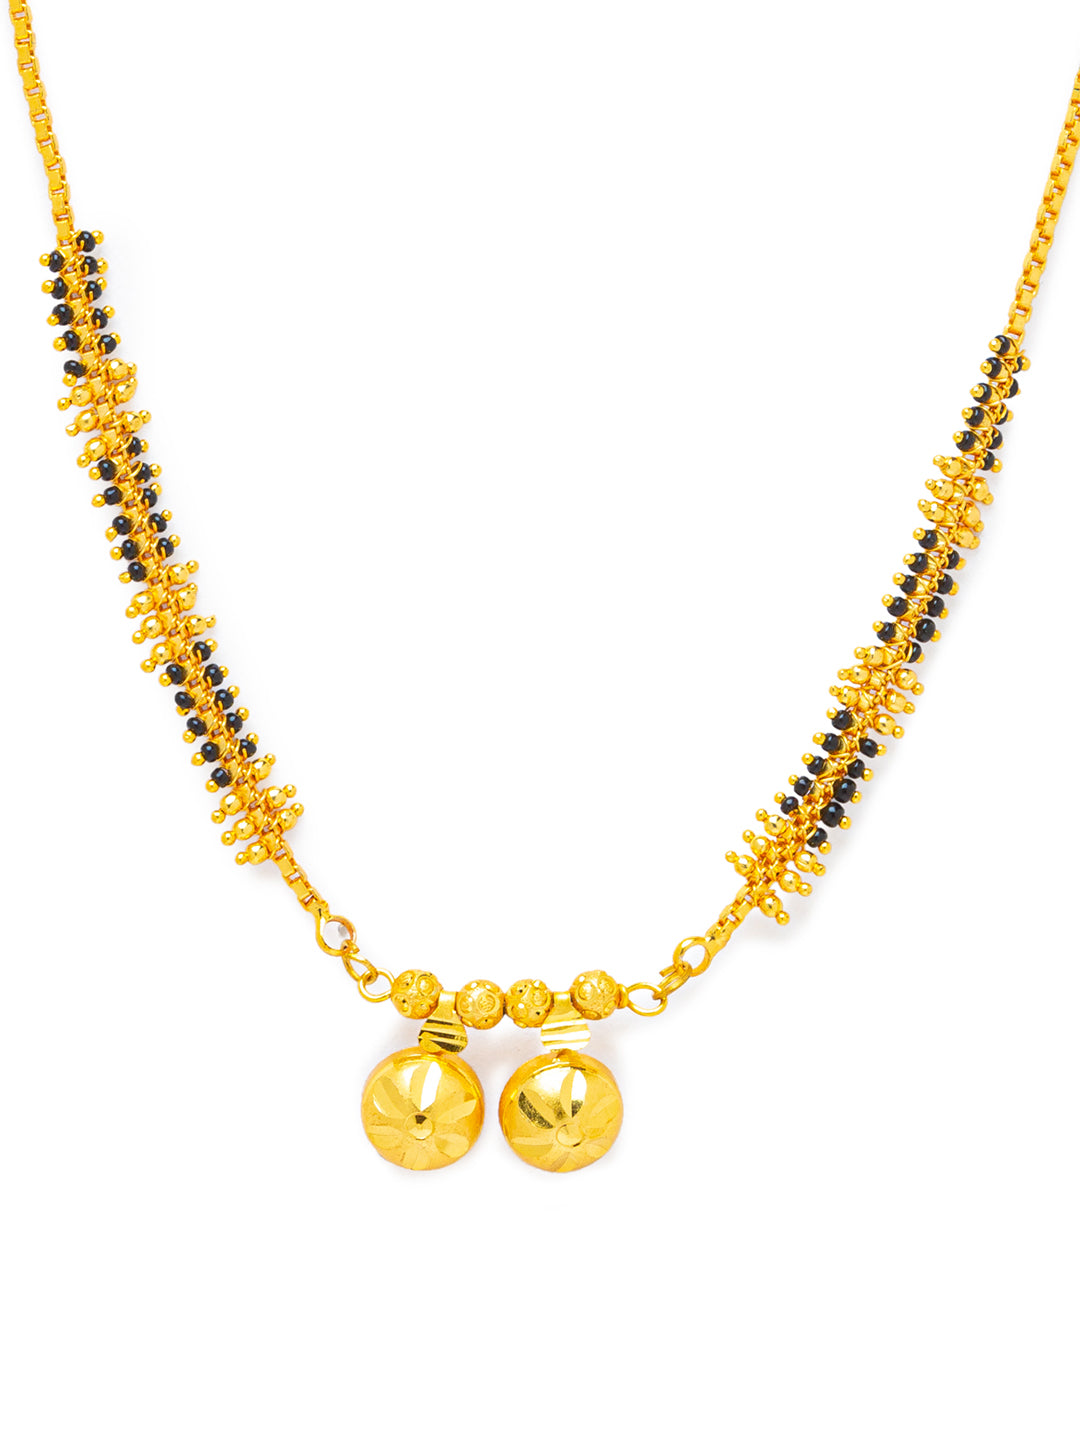 Combo Set of 2 Gold Plated Short Mangalsutra Designs and Long Mangalsutra Designs with Vati Pendant